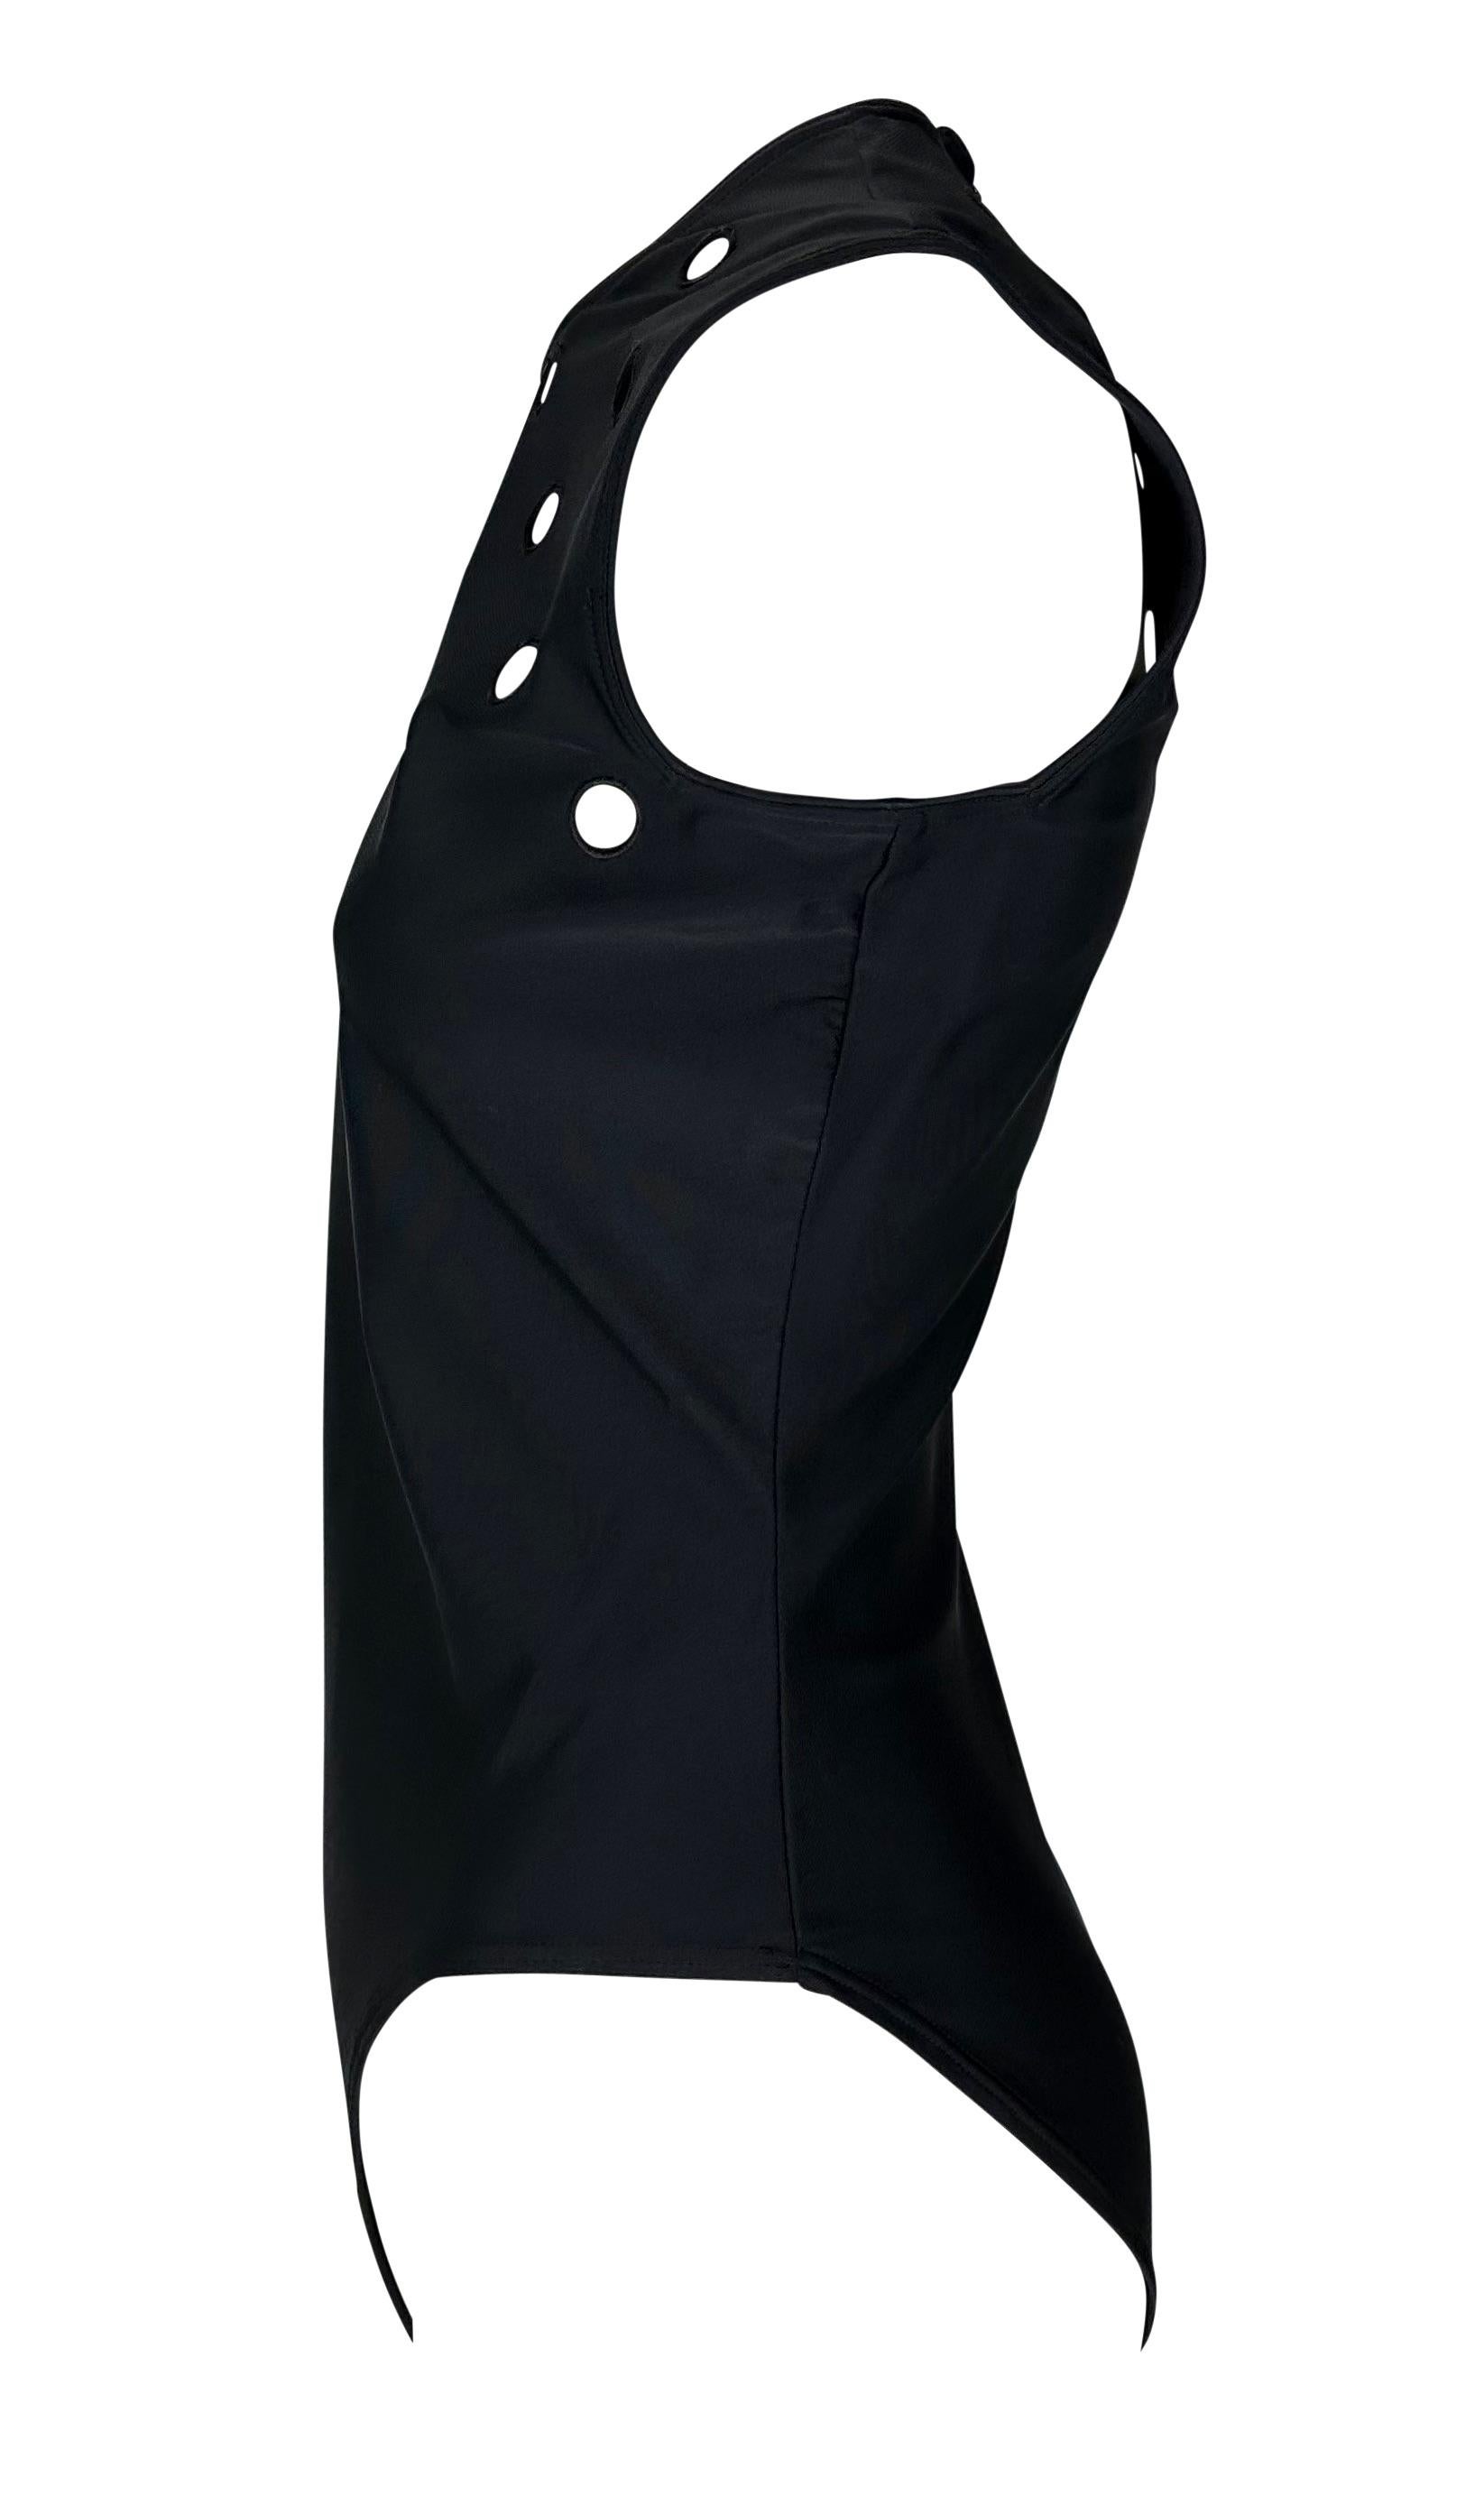 Women's S/S 1994 Gianni Versace Couture Runway Eyelet Cutout Stretch Black Bodysuit Top For Sale